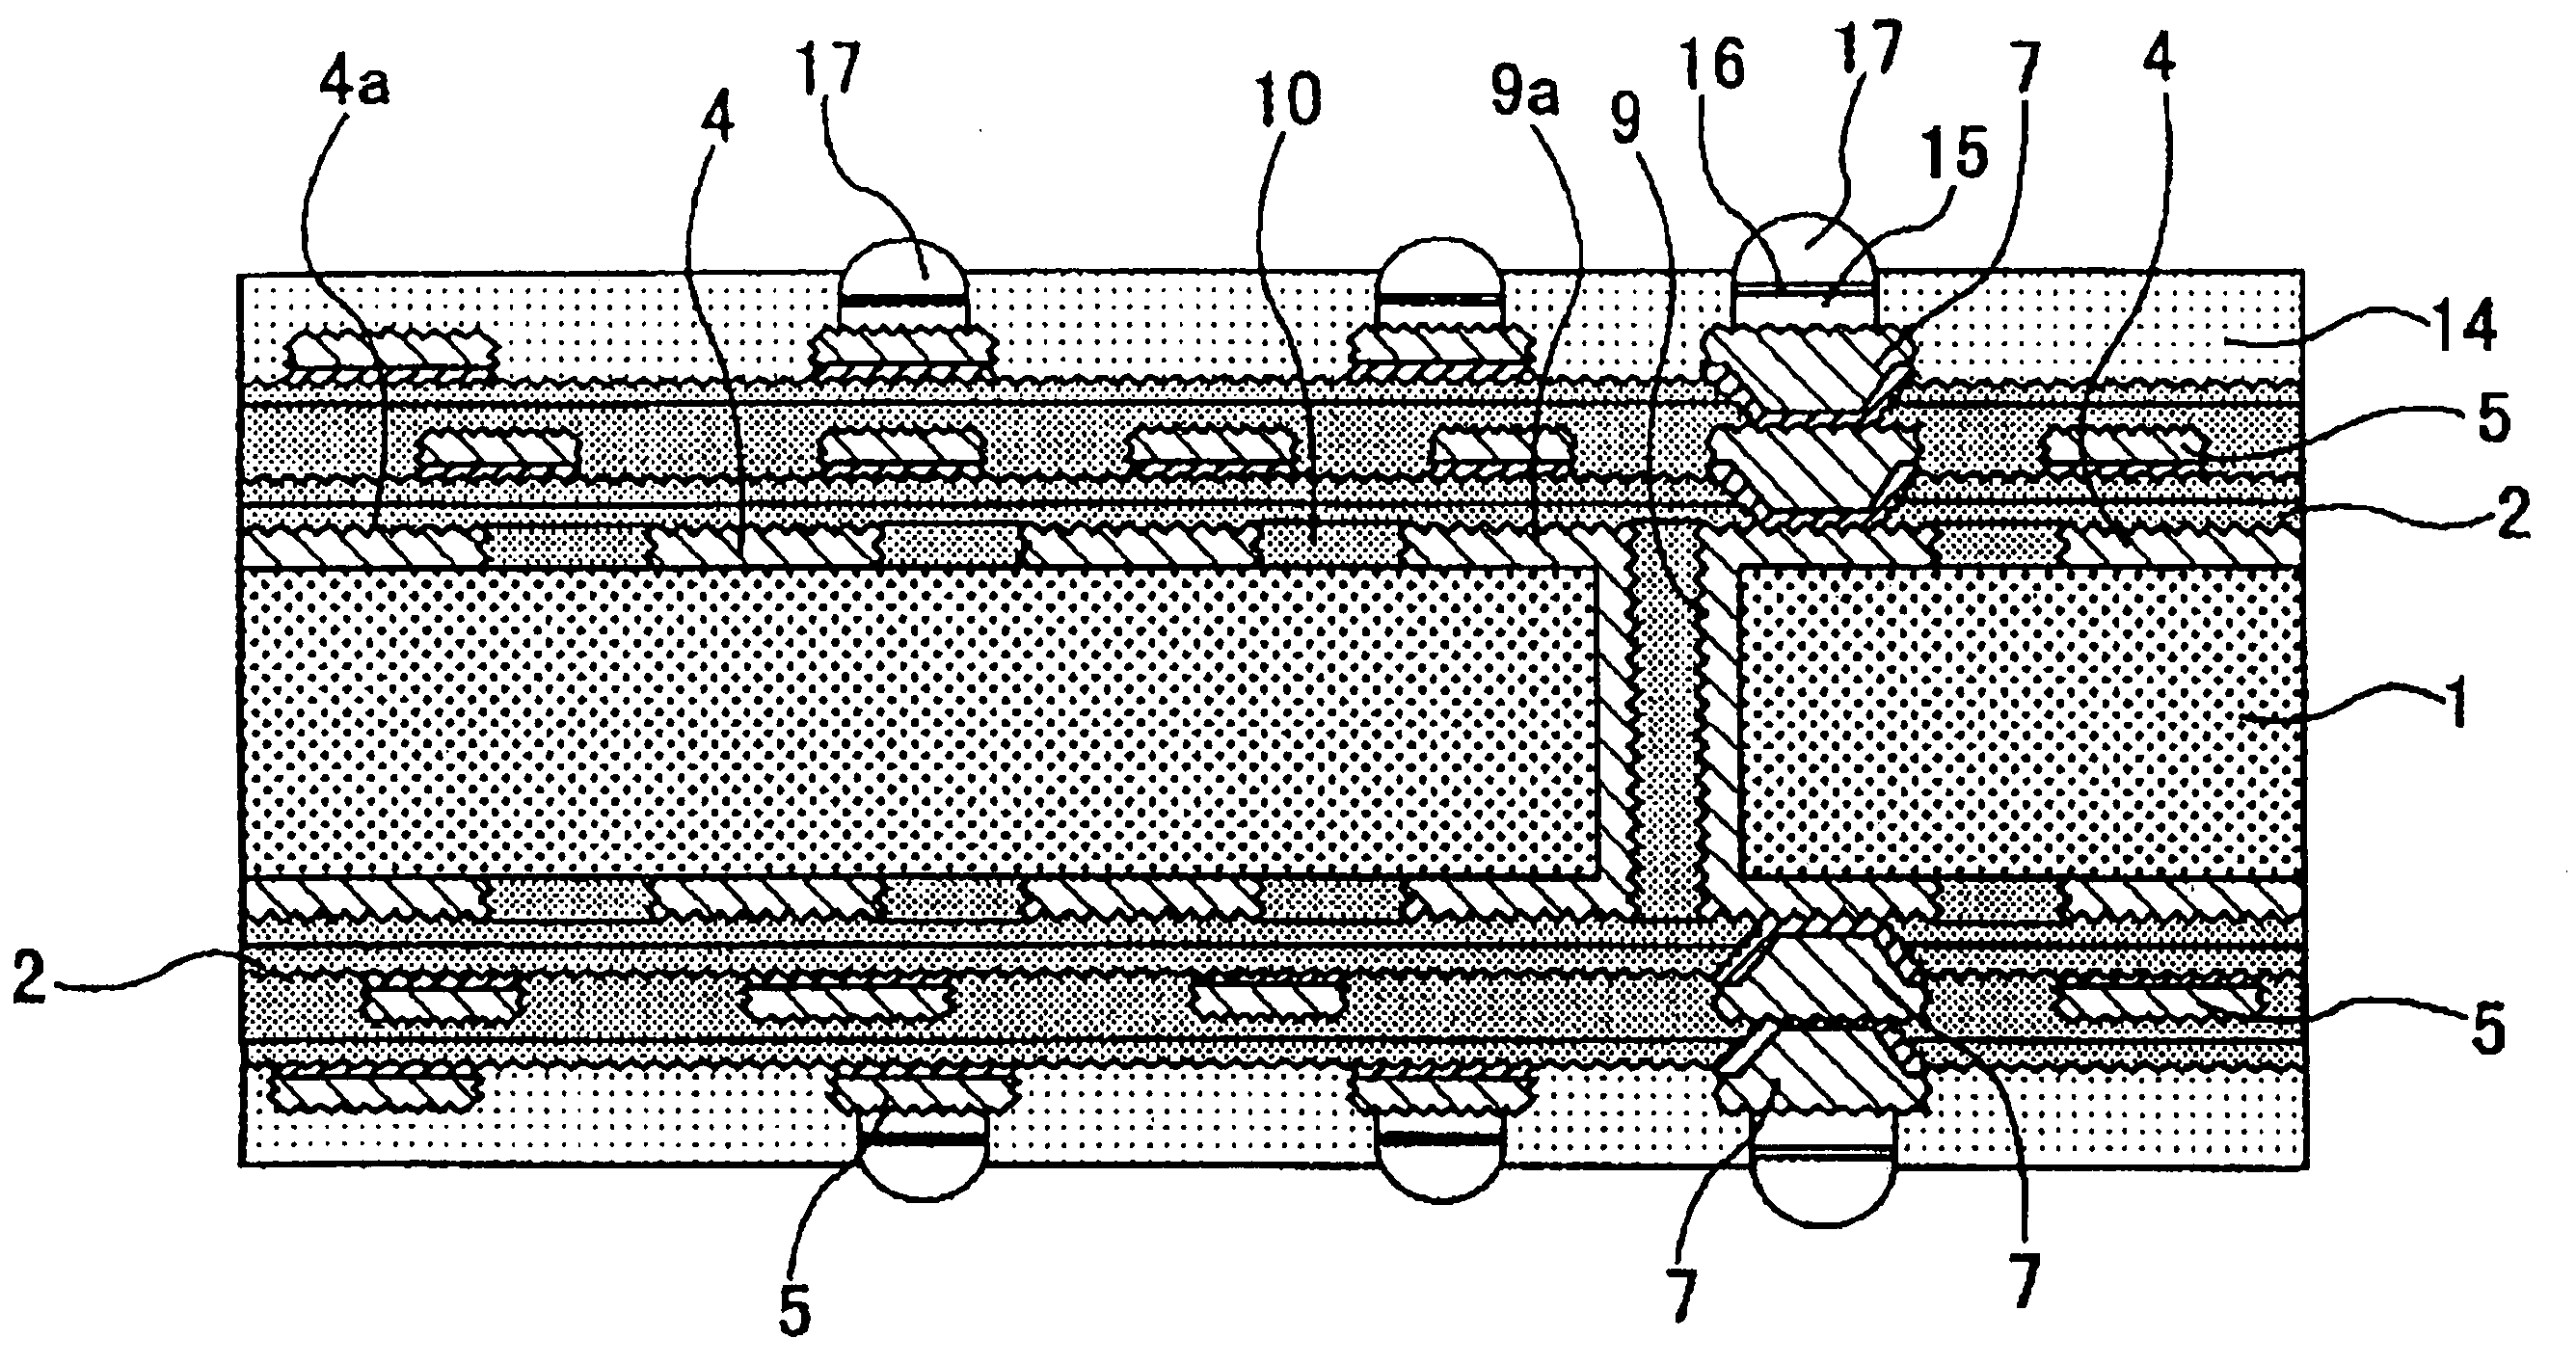 Electroplating solution, method for manufacturing multilayer printed circuit board using the same solution, and multilayer printed circuit board